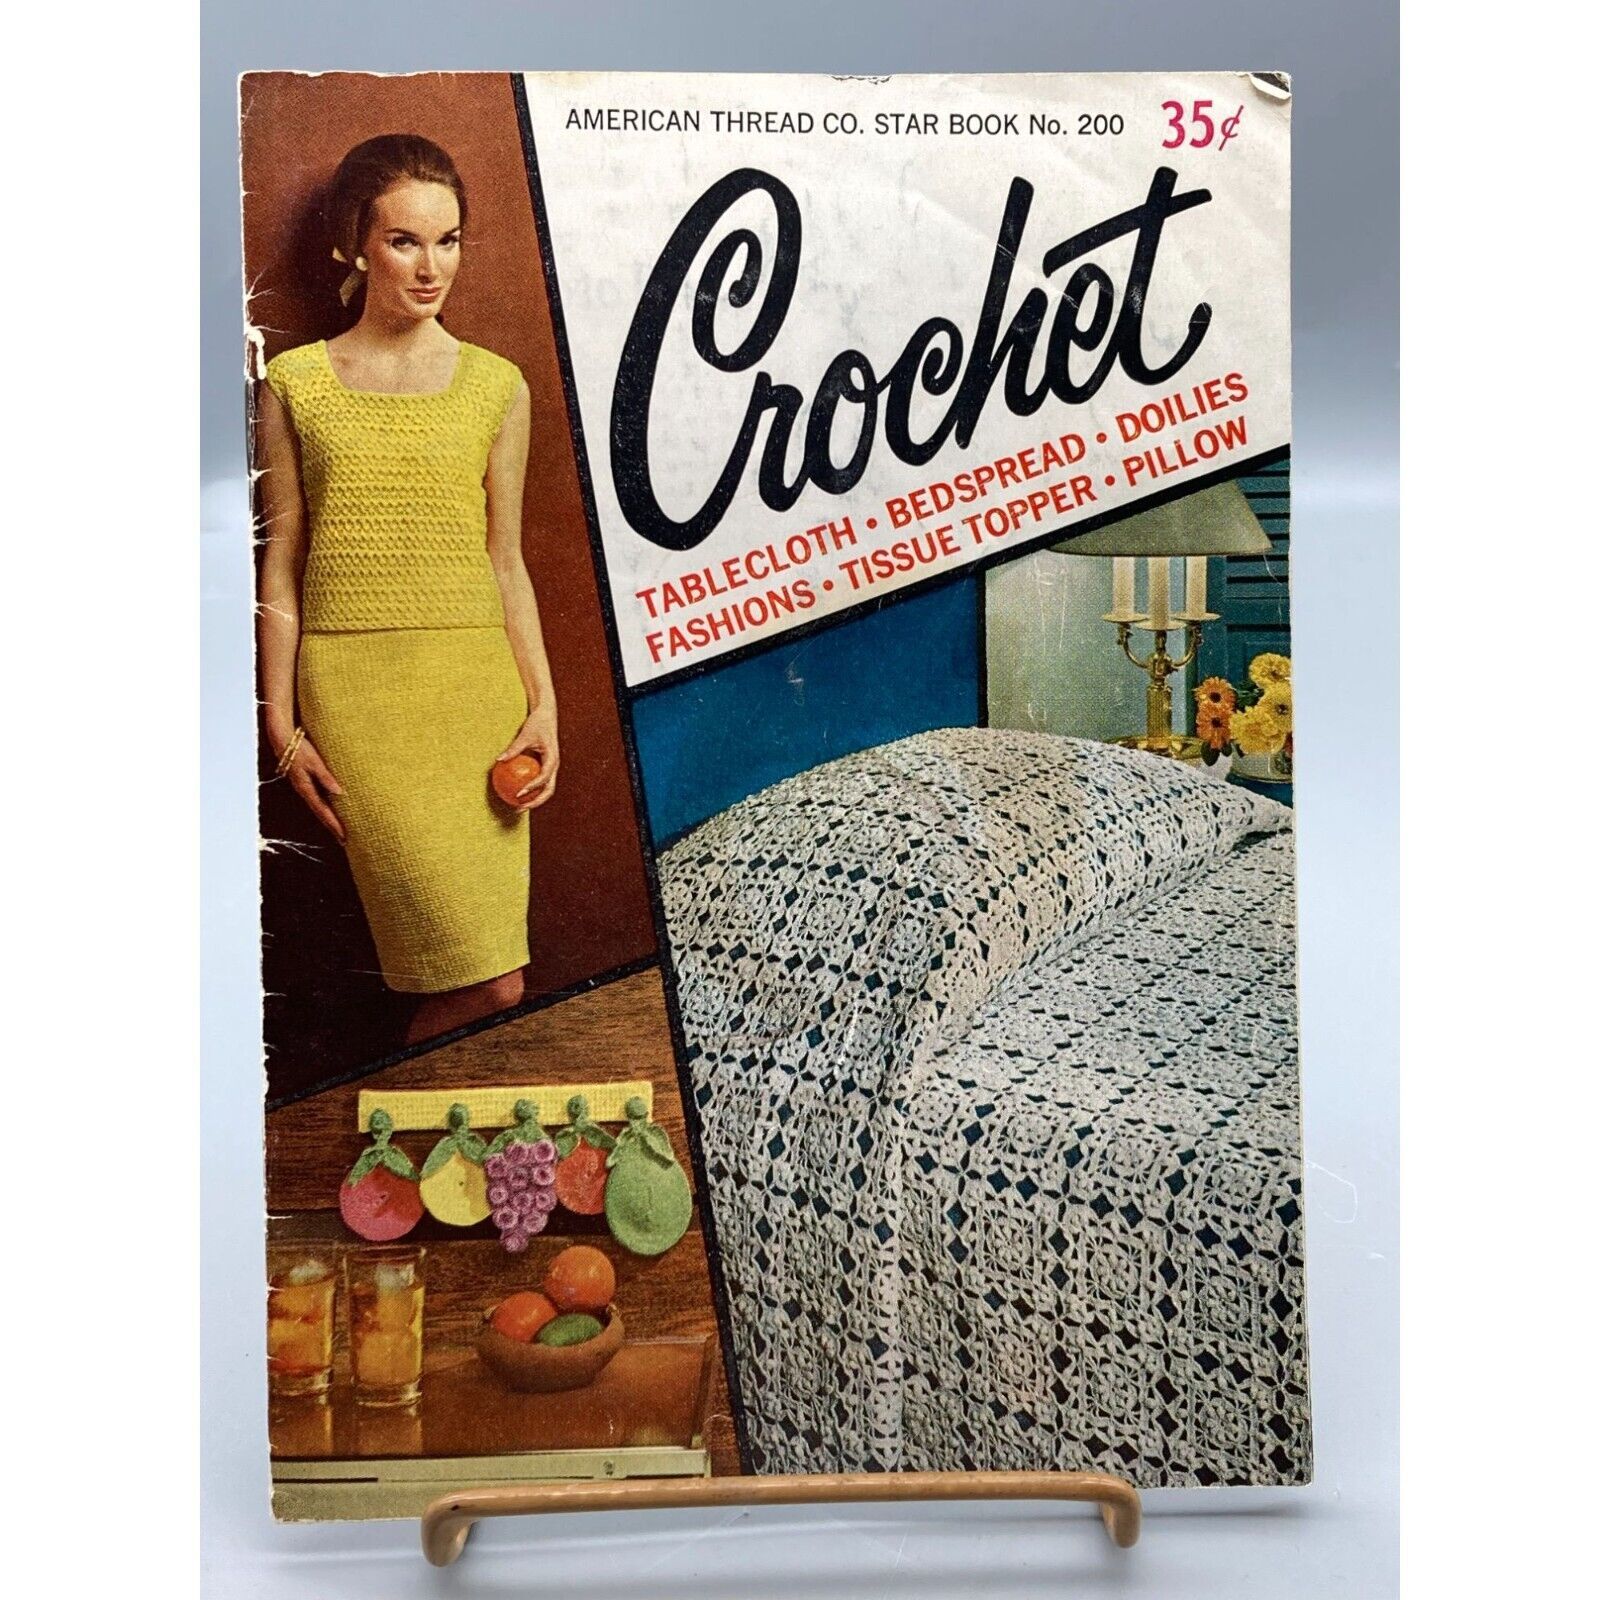 Primary image for Vintage Let's Crochet 1960s Star Book 200, Pattern Booklet from American Thread